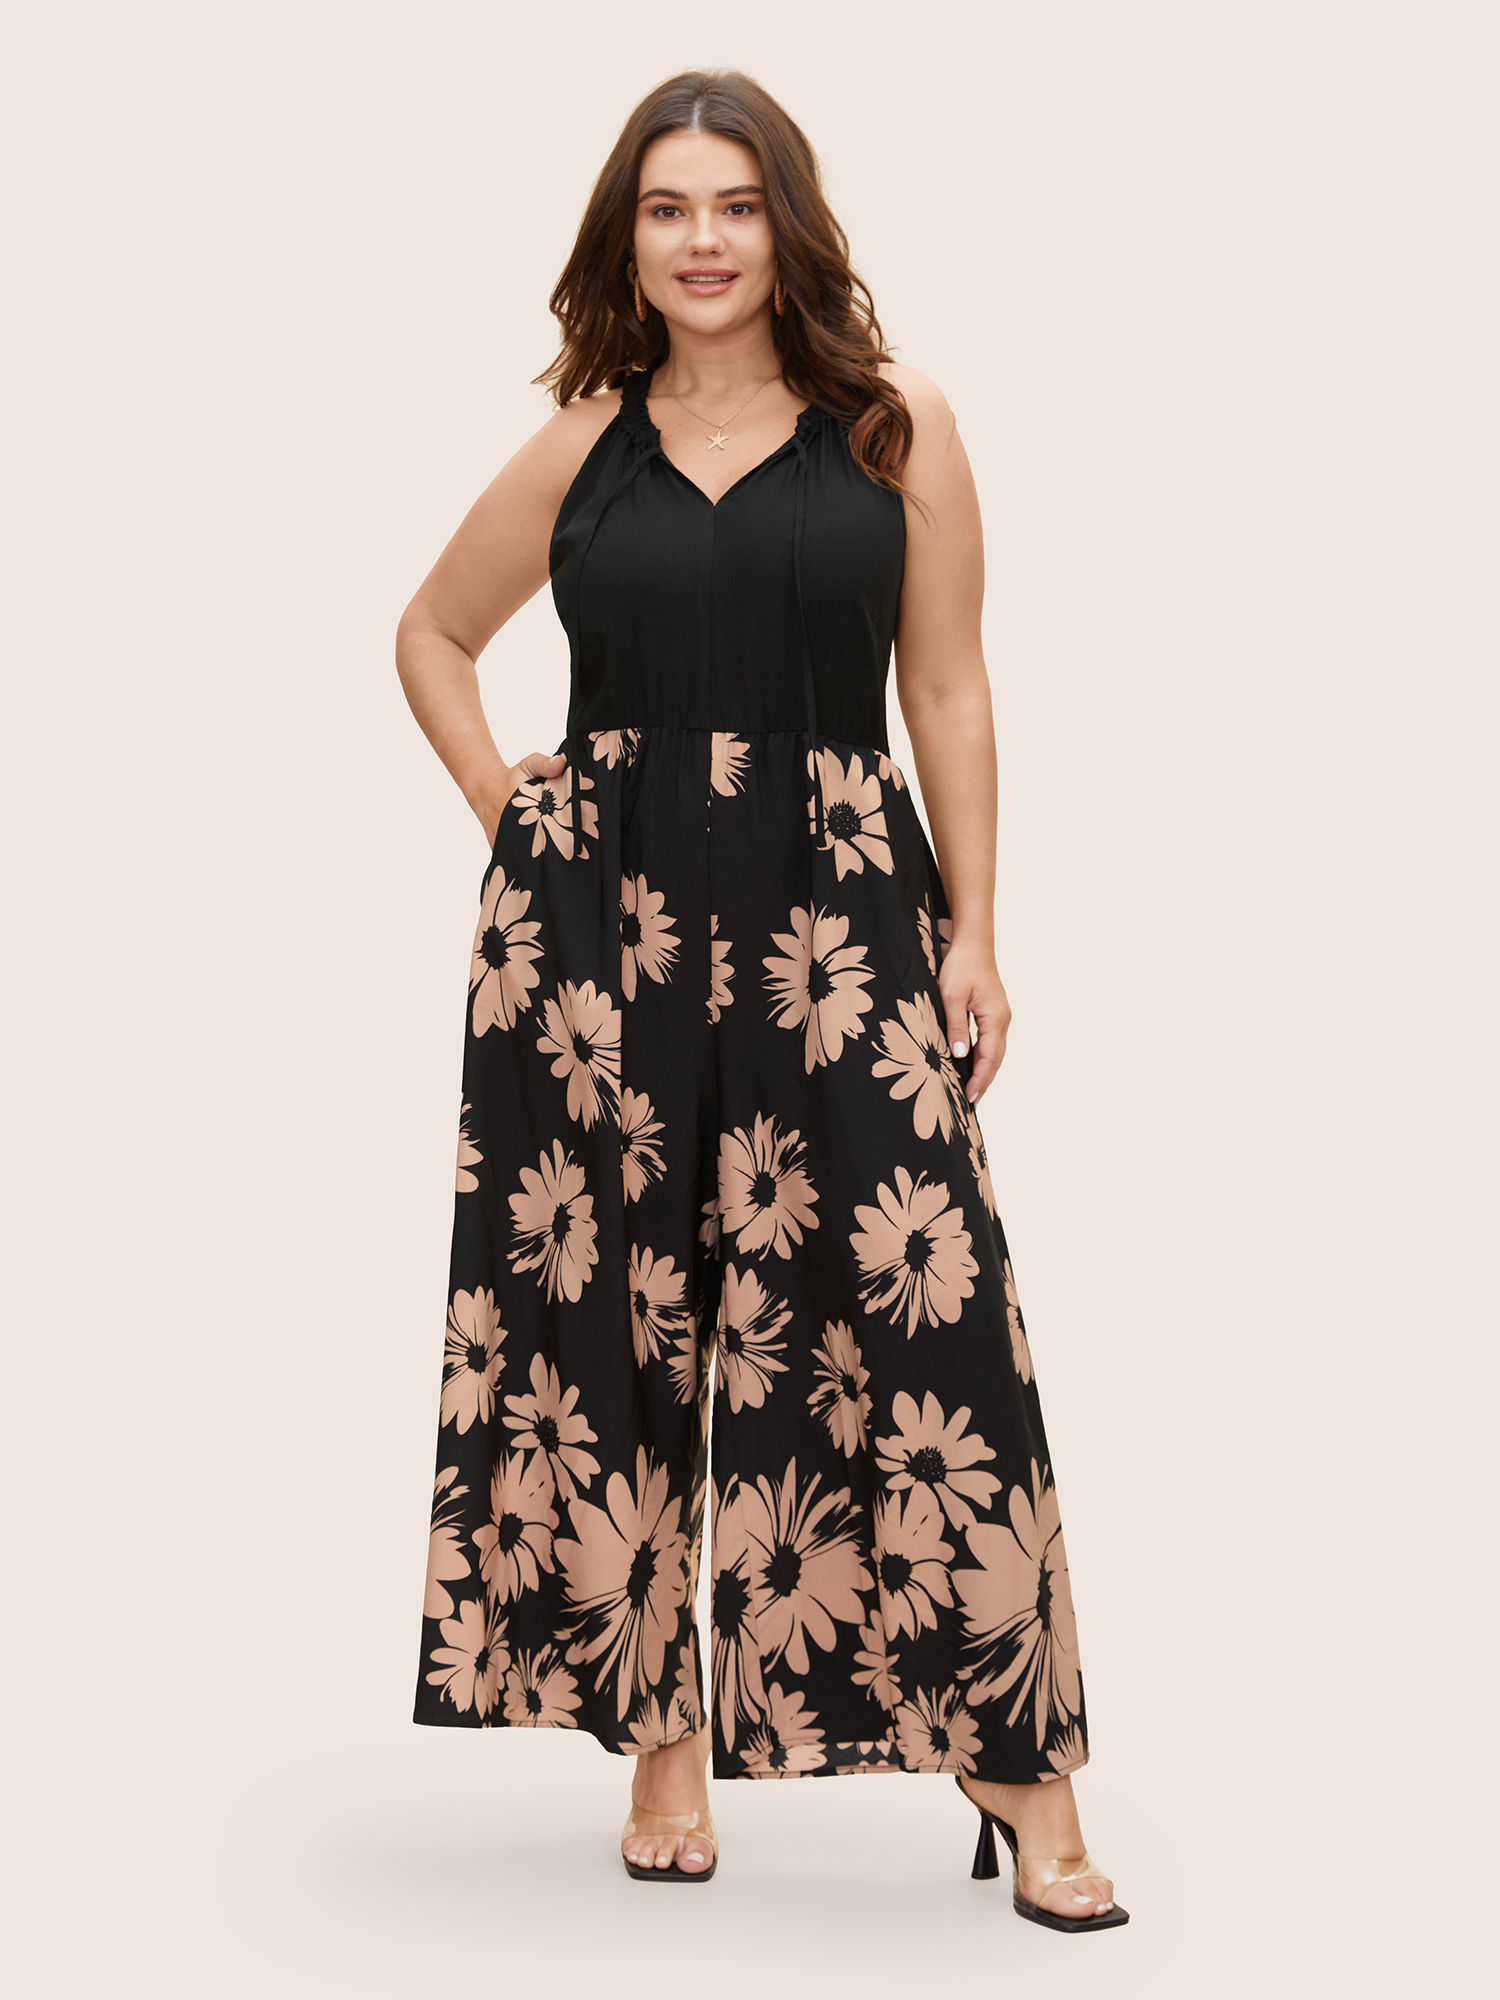 

Plus Size Black Floral Tie Knot Patchwork Frill Trim Jumpsuit Women Resort Sleeveless V-neck Vacation Loose Jumpsuits BloomChic